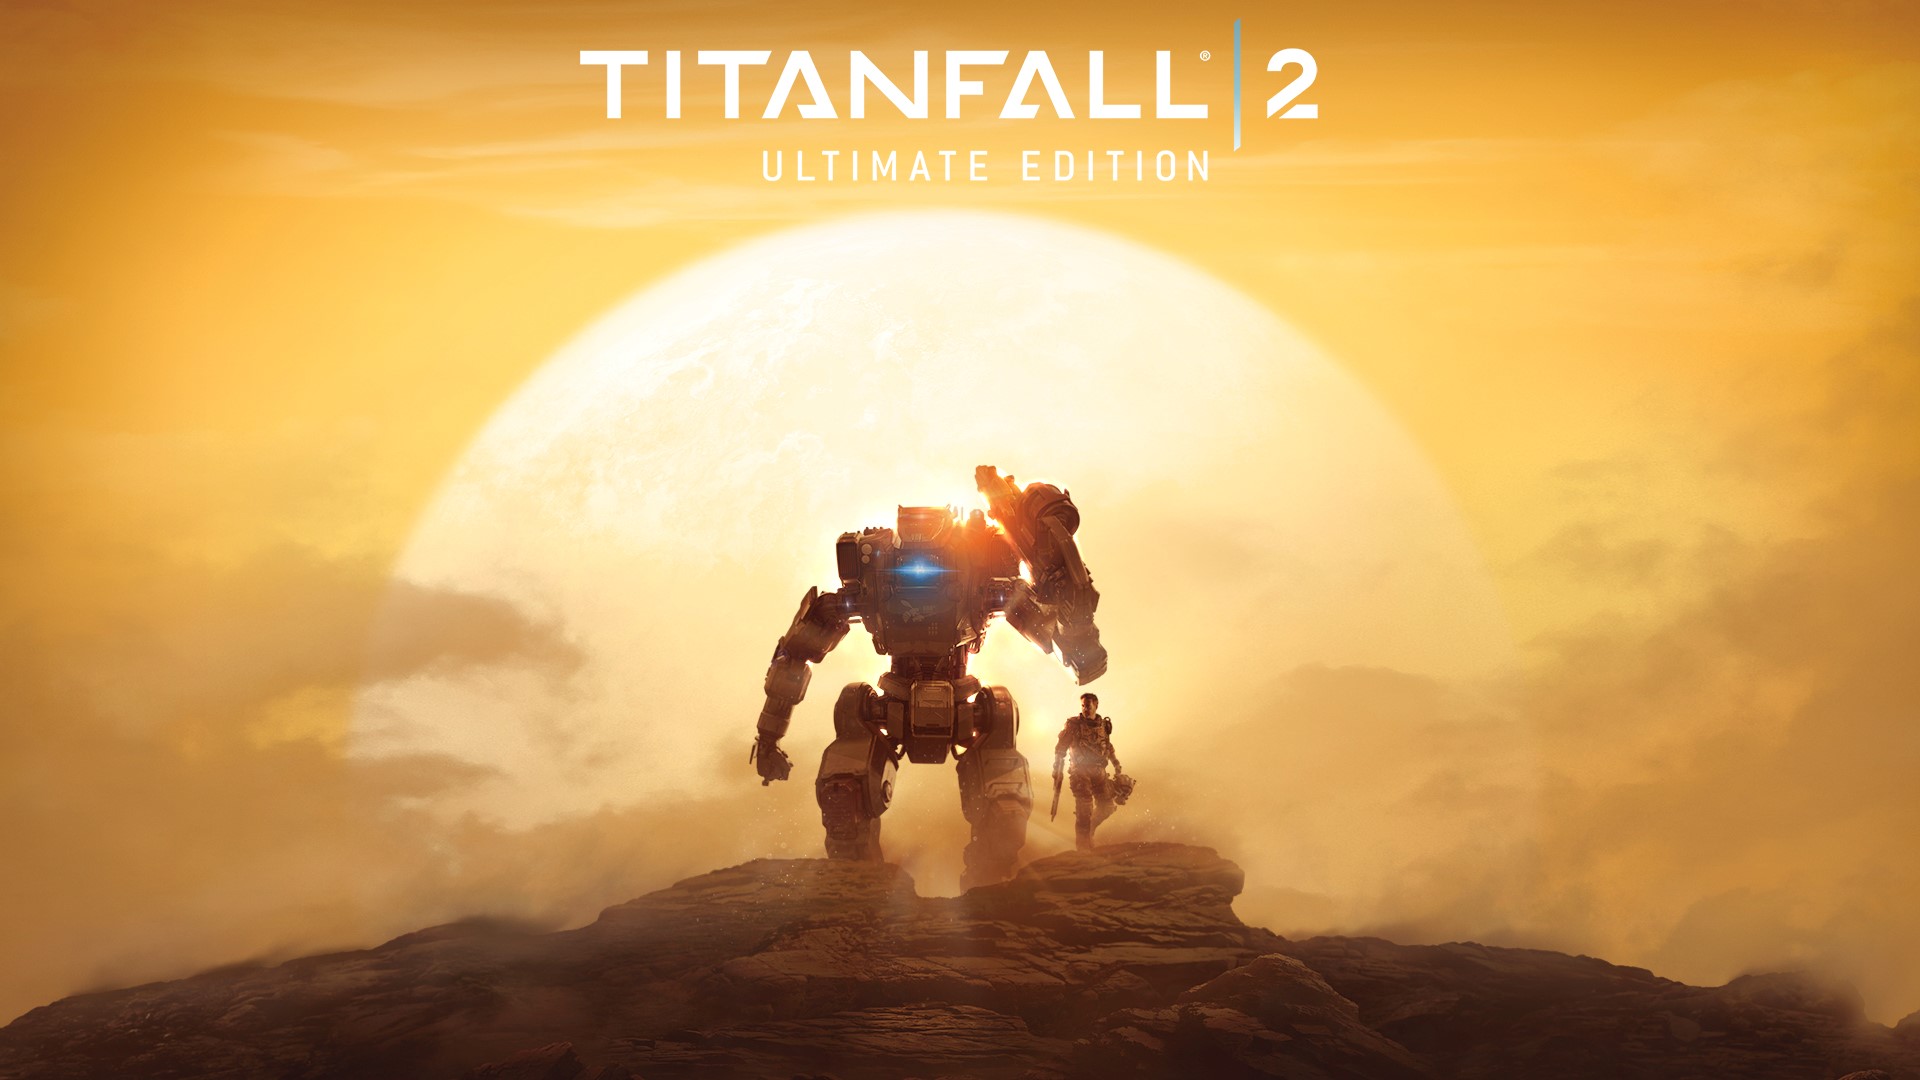 Titanfall 2 Ultimate edition